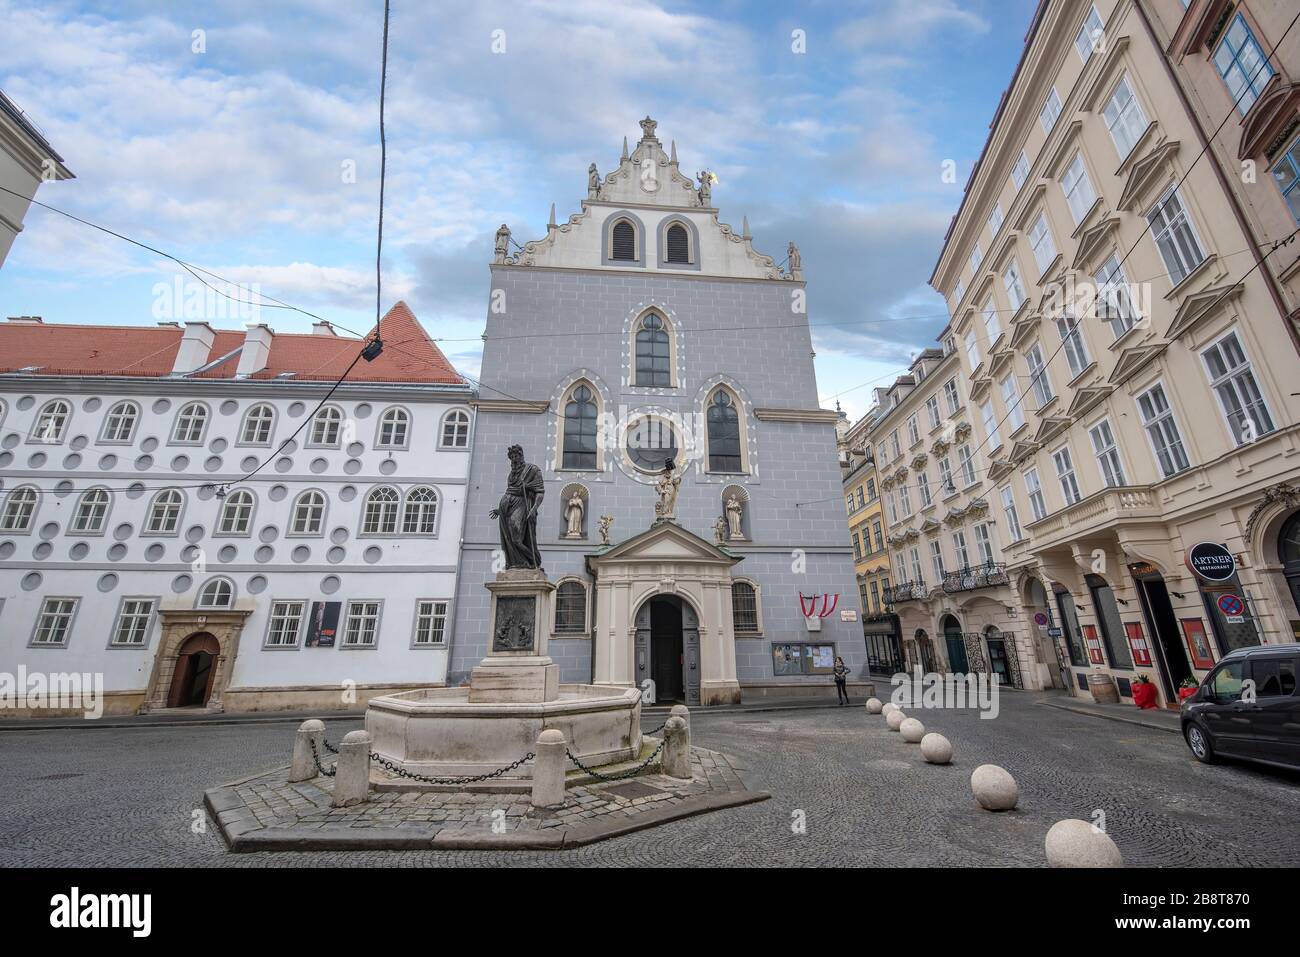 VIENNA, AUSTRIA. The Franciscans church, dedicated to St Hieronymus (St Jerome) was built 1611 in Renaissance style with a baroque interior. Stock Photo